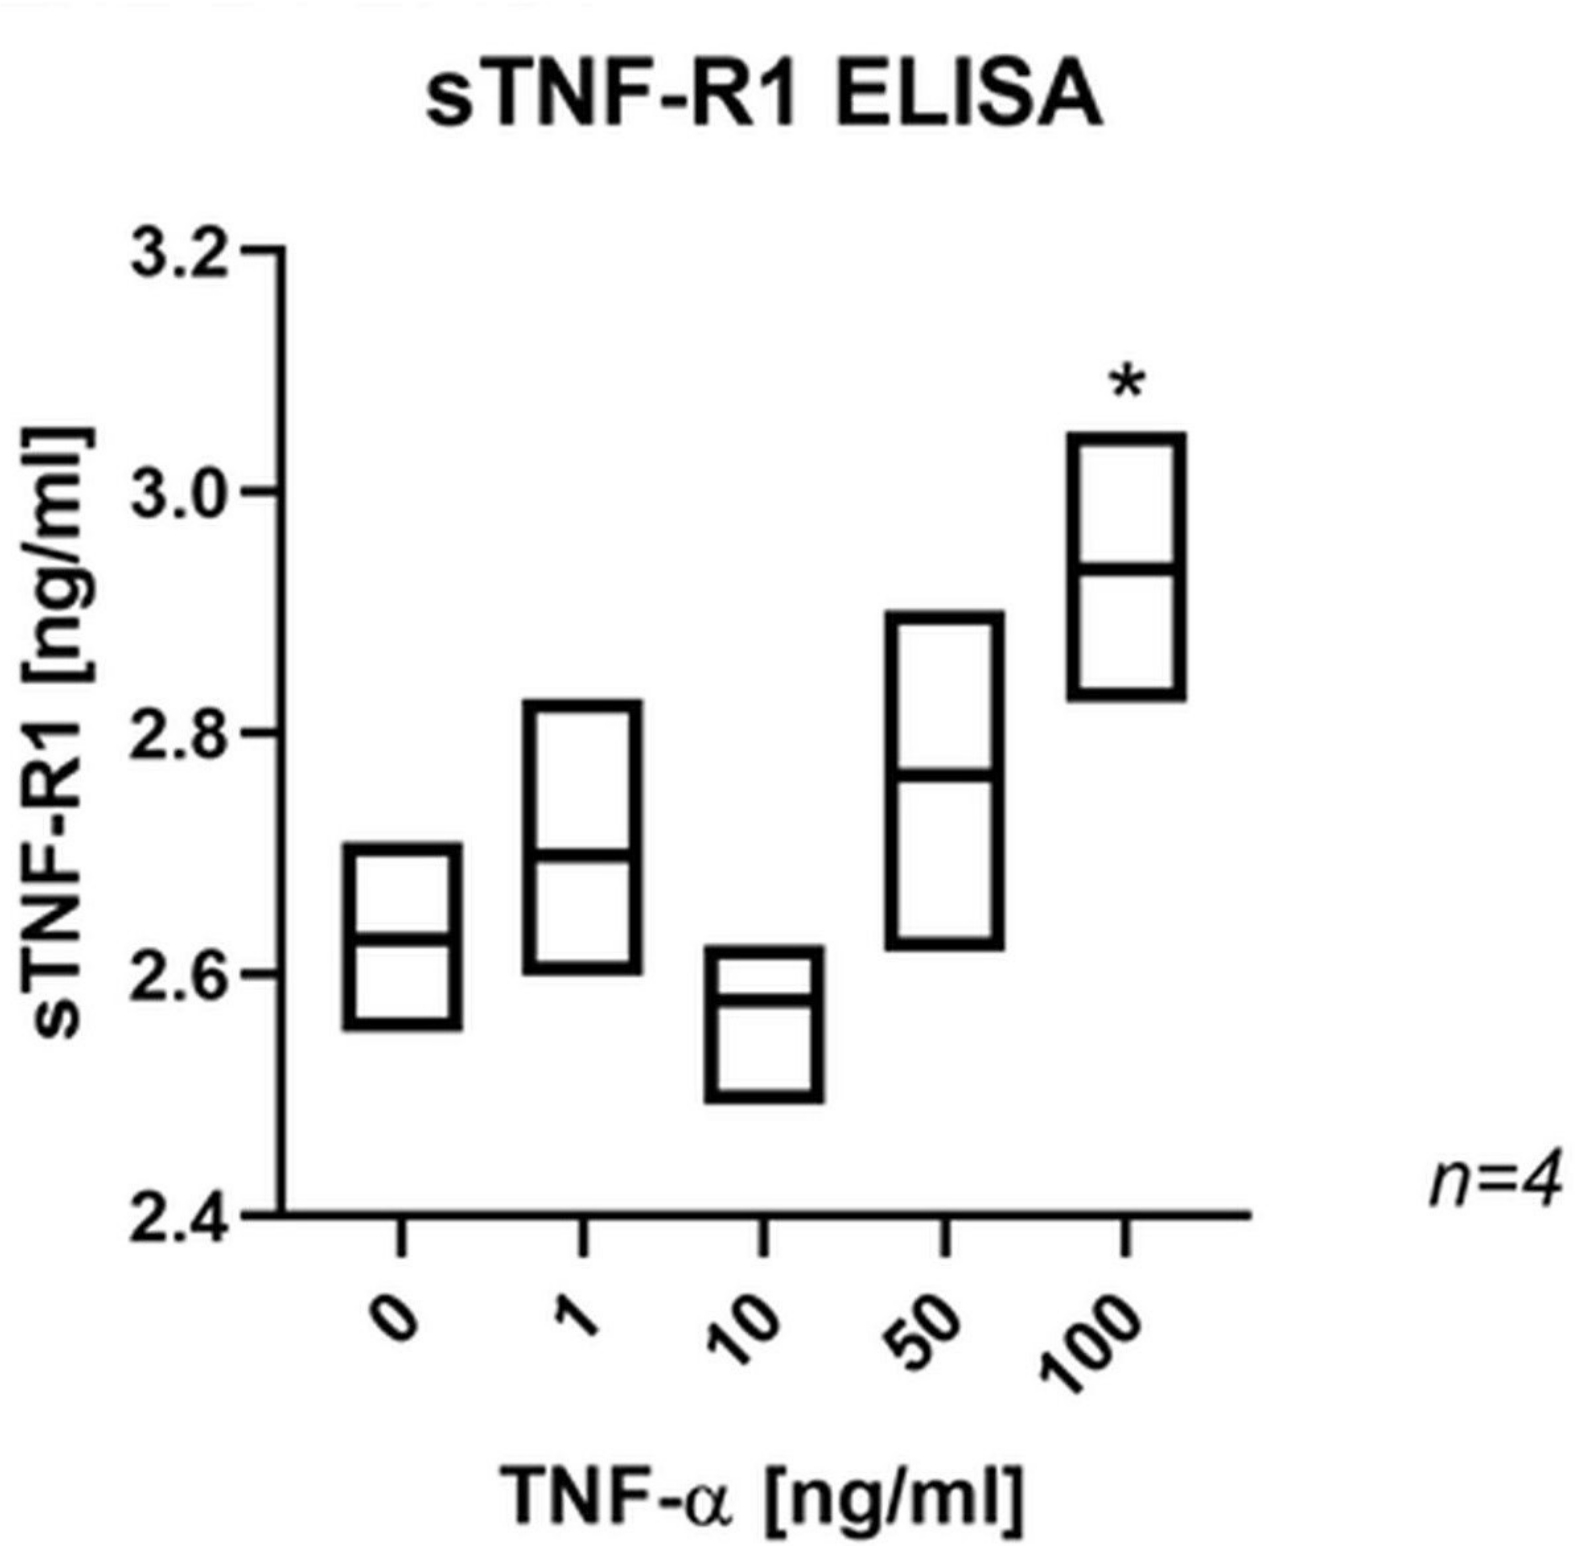 Fig. 4 
            Box plot showing a significant effect of tumour necrosis factor-alpha (TNF-α) on the release of soluble tumour necrosis factor-receptor 1 (sTNF-R1) in SaOs-2 cells. *p < 0.01 versus control group, evaluated by one-way analysis of variance followed by post-hoc analysis using Dunnett’s multiple comparisons test. ELISA, enzyme-linked immunosorbent assay.
          